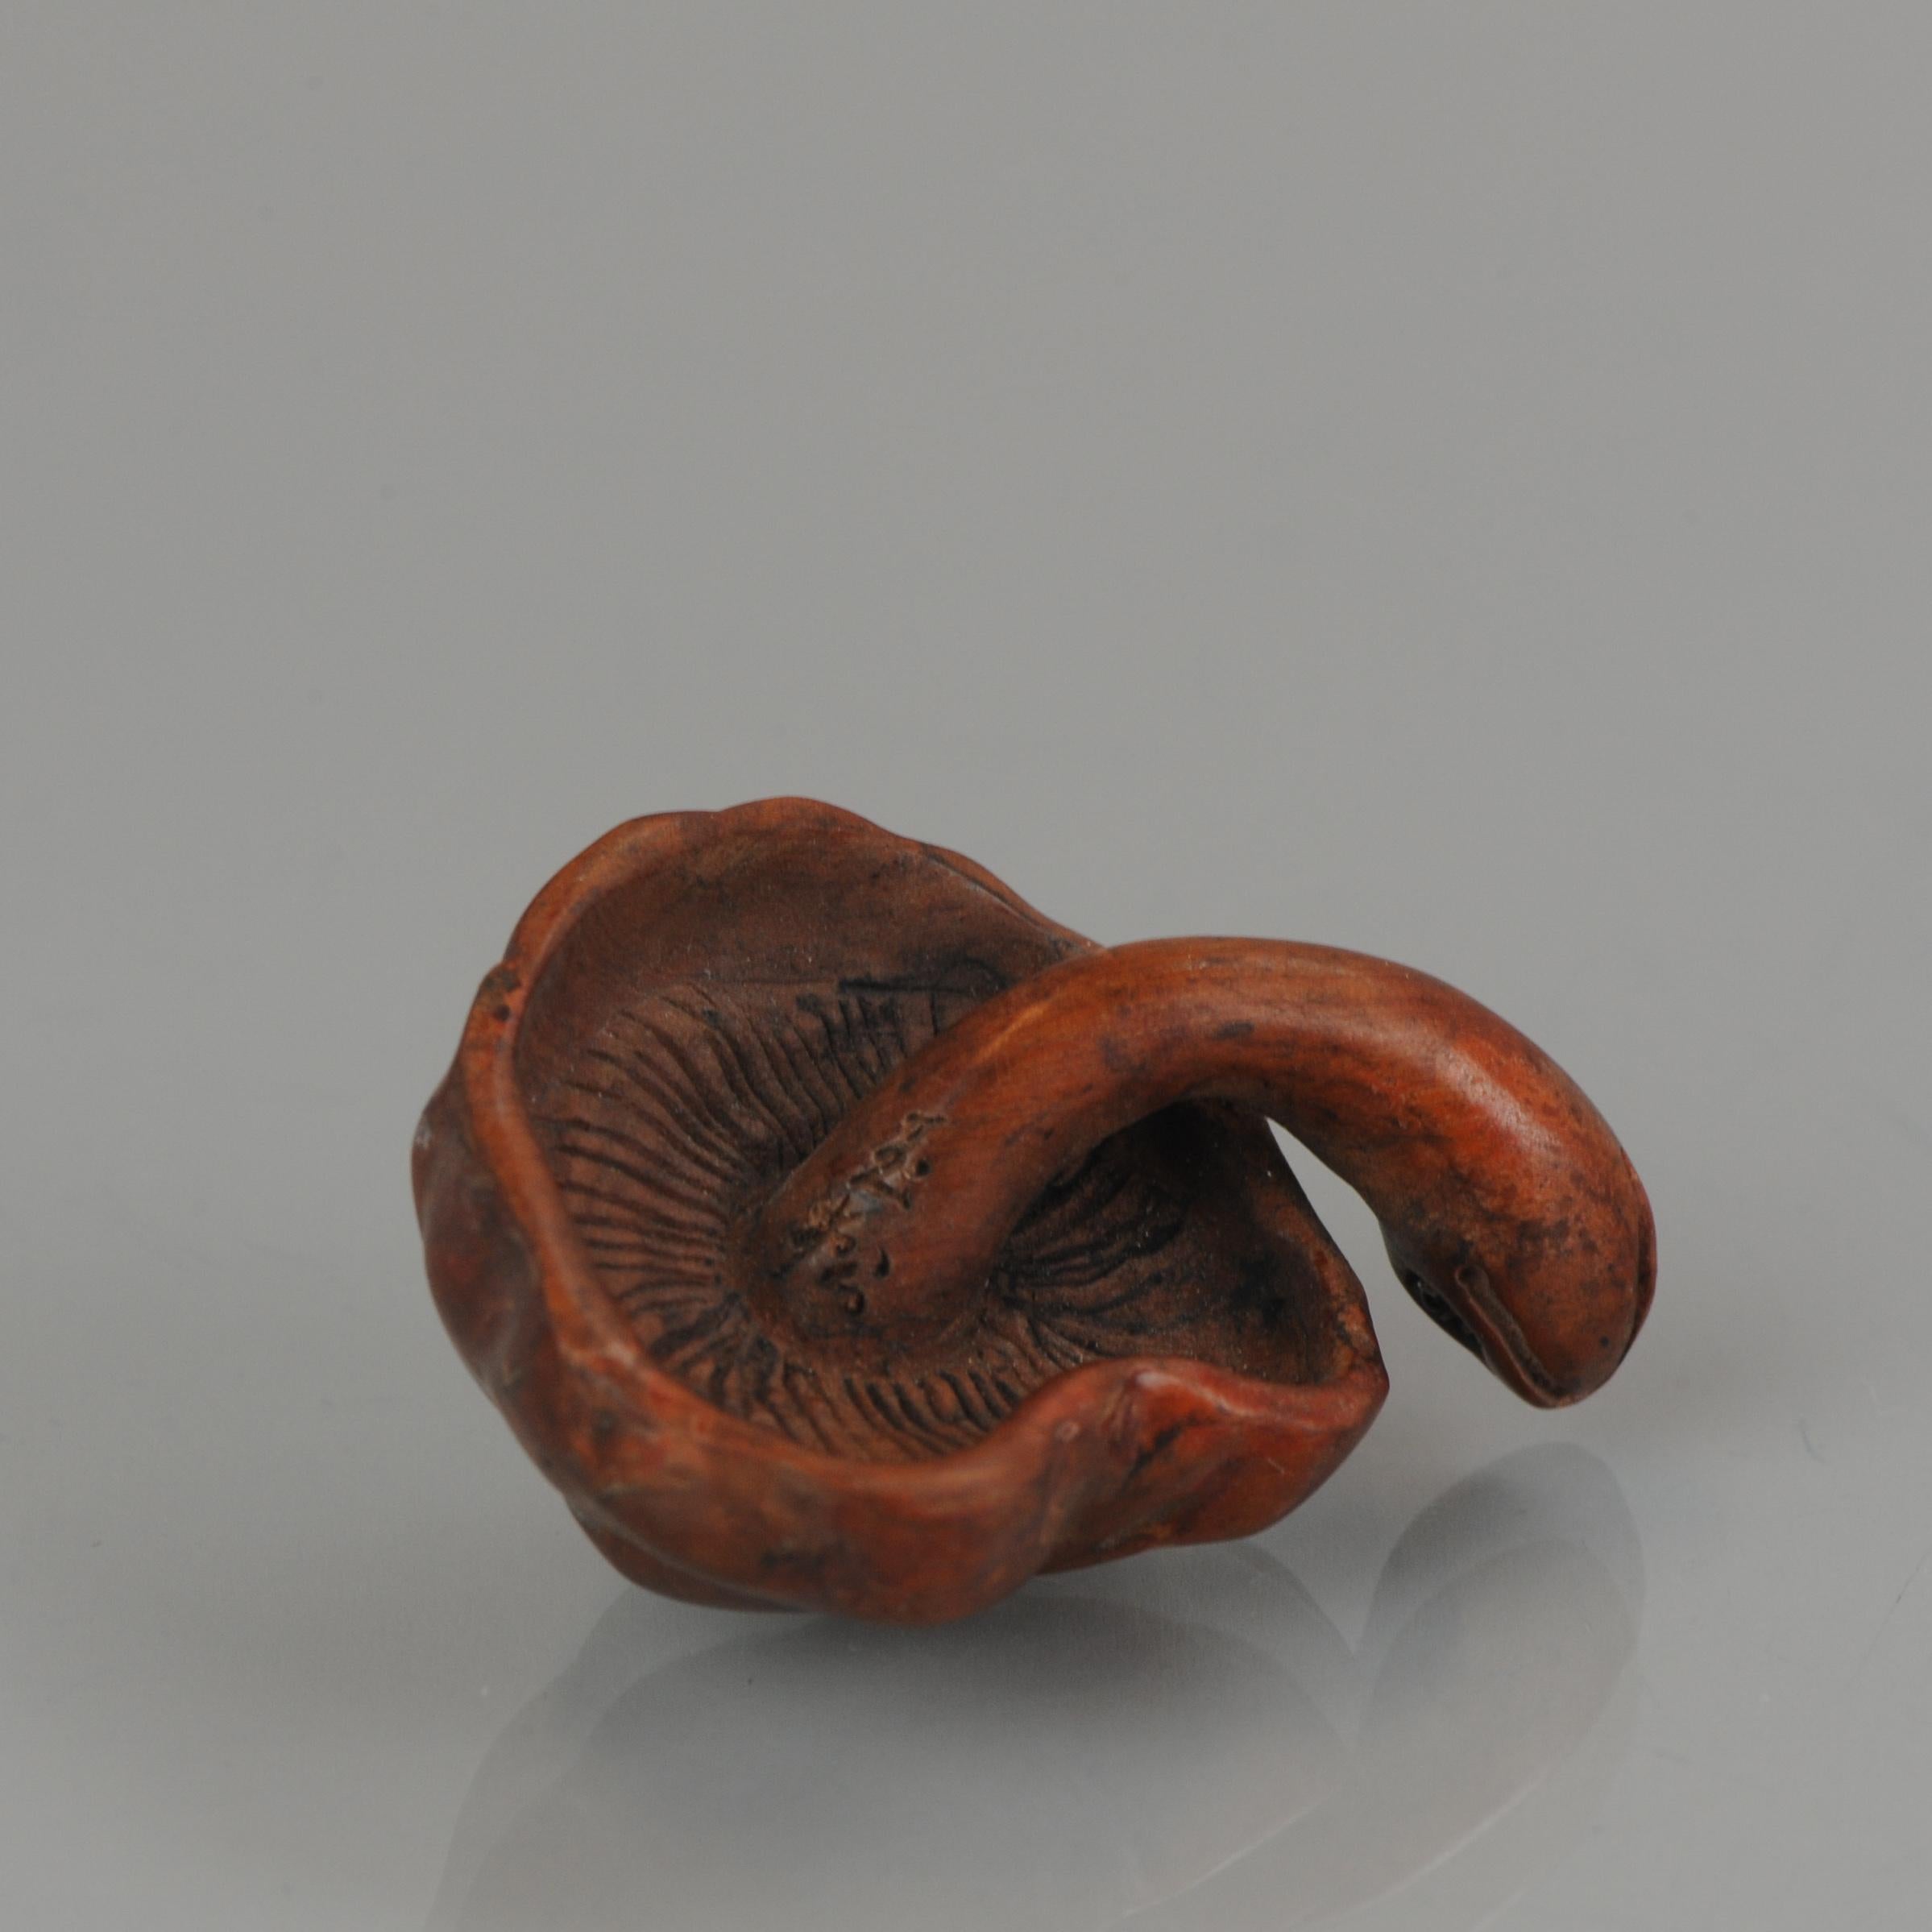 Box Wood Netsuke Turtle Mushroom Japanese Japan Signed, 20th Century In Good Condition For Sale In Amsterdam, Noord Holland